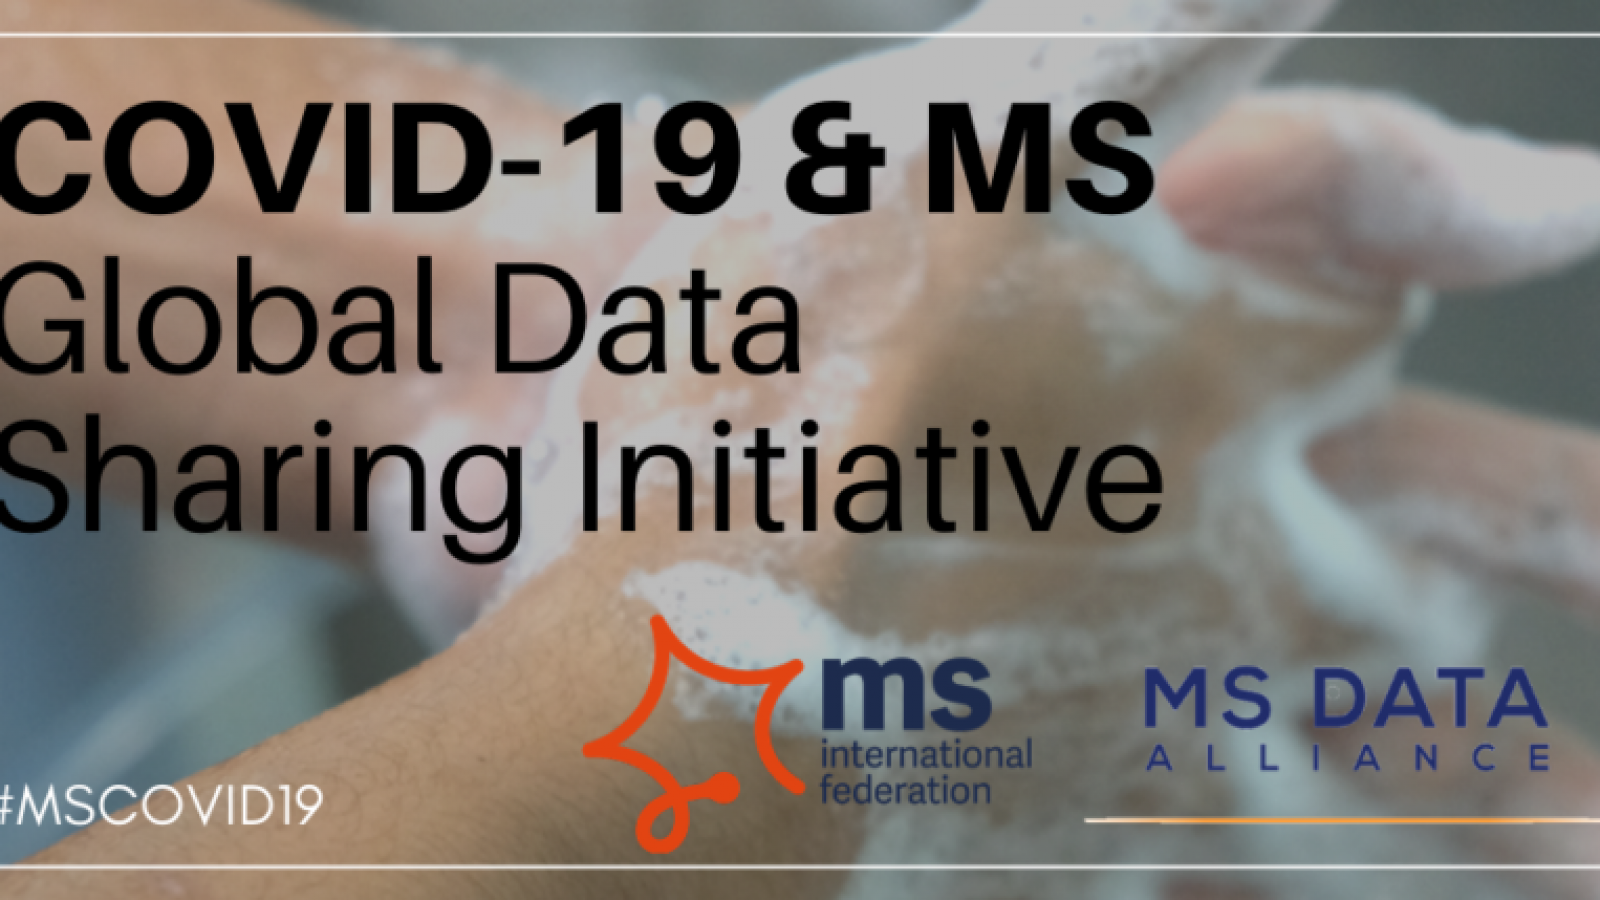 MSIF - Data Sharing Initiative logo and text layer over an image of hands being washed under a tap. 